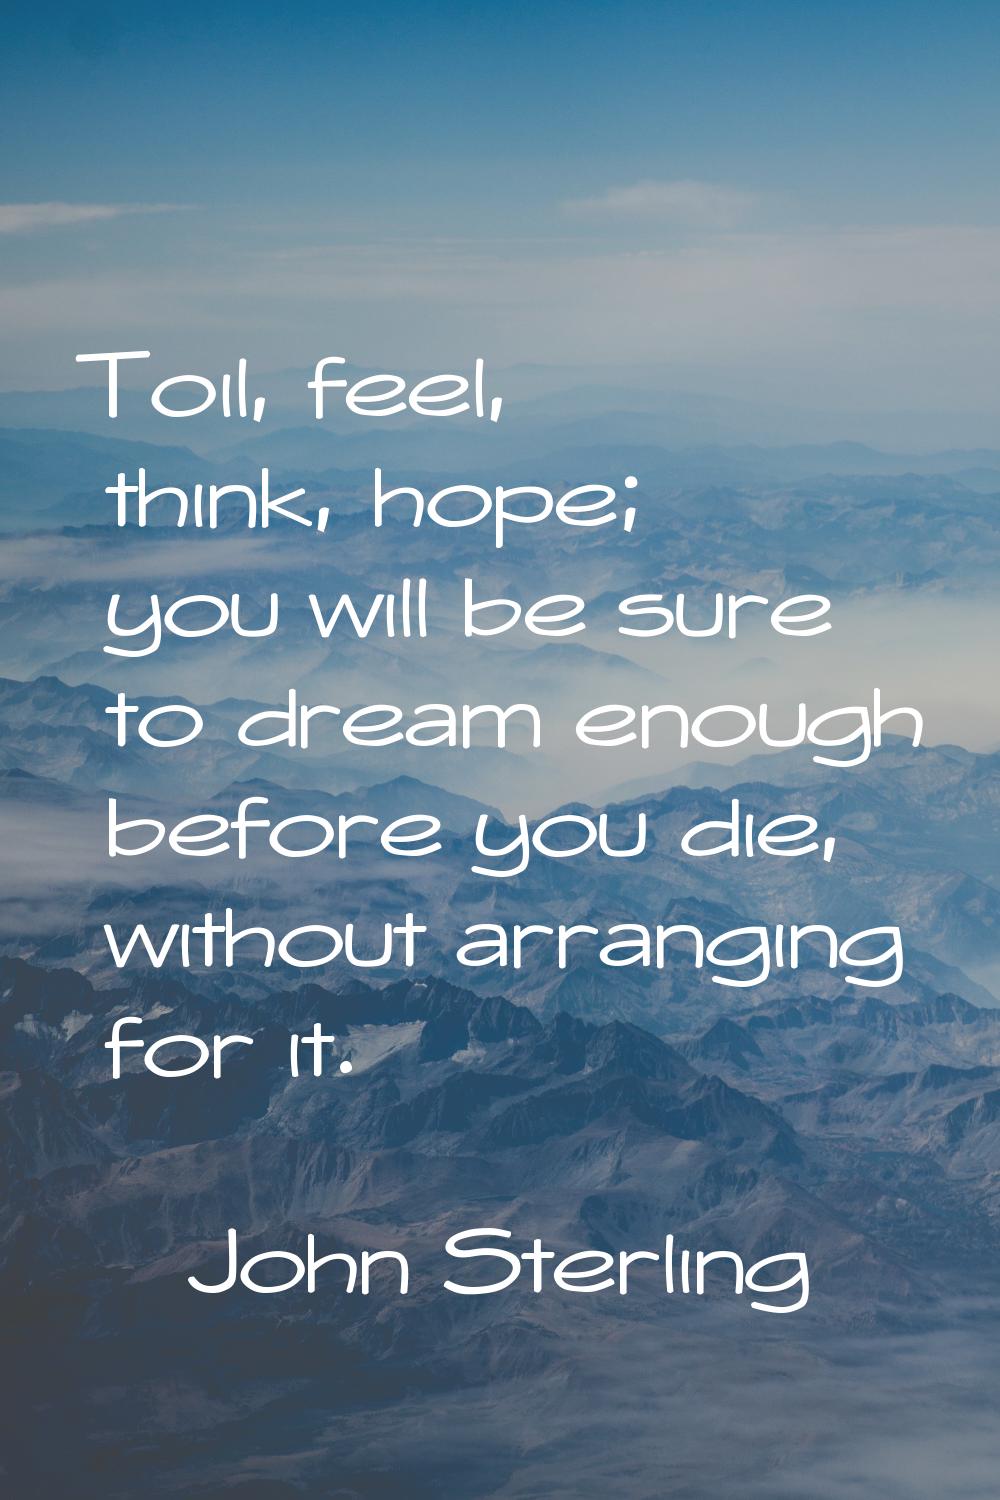 Toil, feel, think, hope; you will be sure to dream enough before you die, without arranging for it.